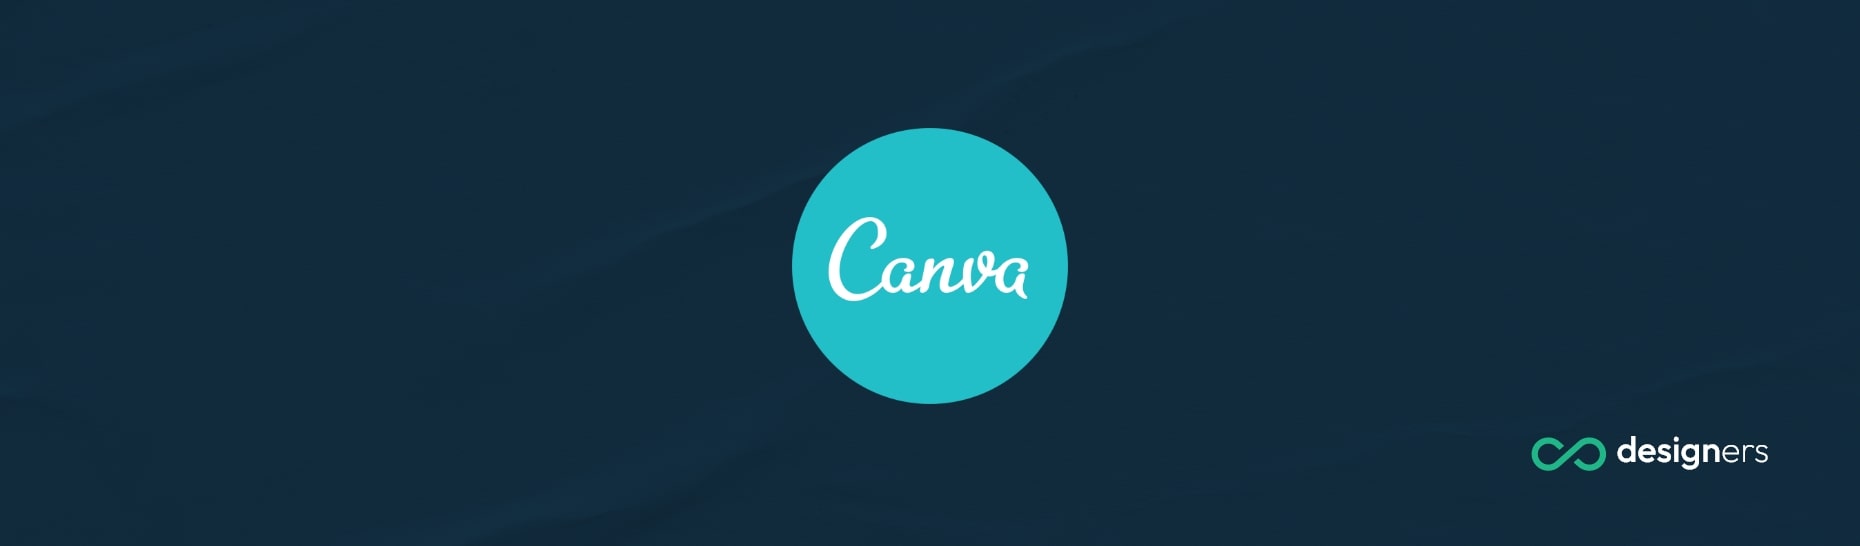 Is Canva the Best Design App?